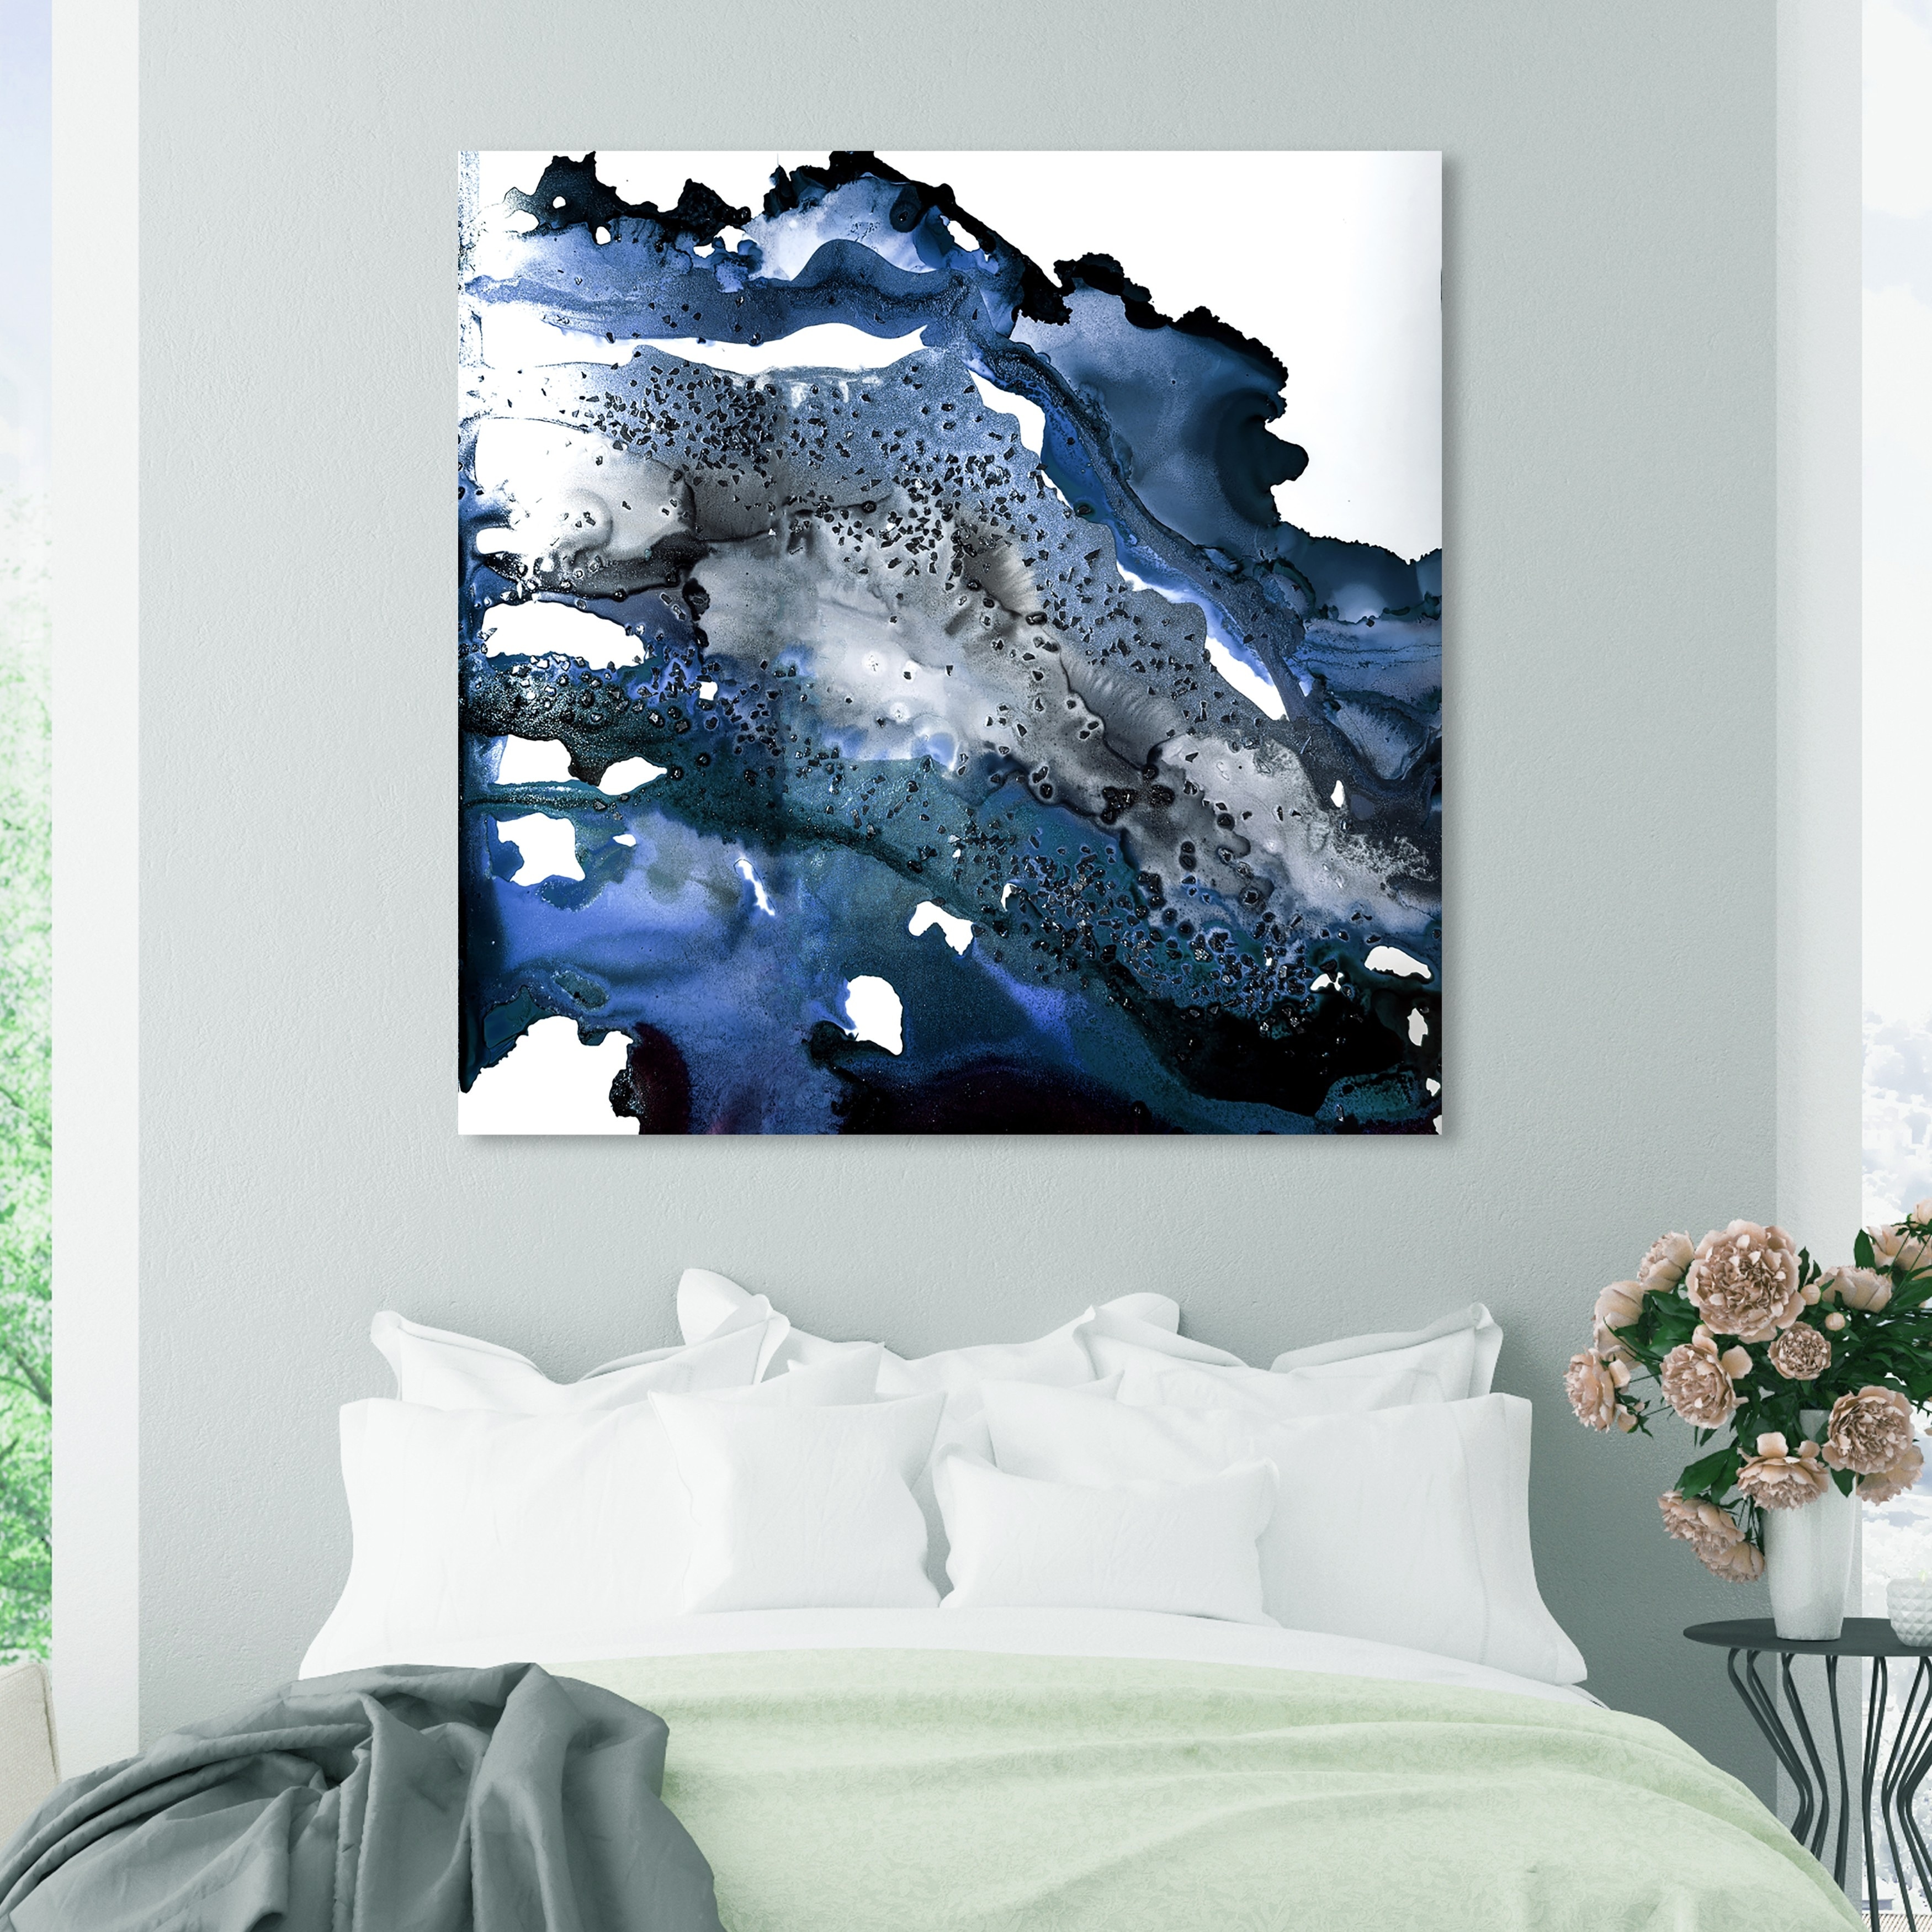 Oliver Gal Abstract Wall Art Canvas Prints 'Glitter Navy' Watercolor  Blue, White On Sale Bed Bath  Beyond 30765445